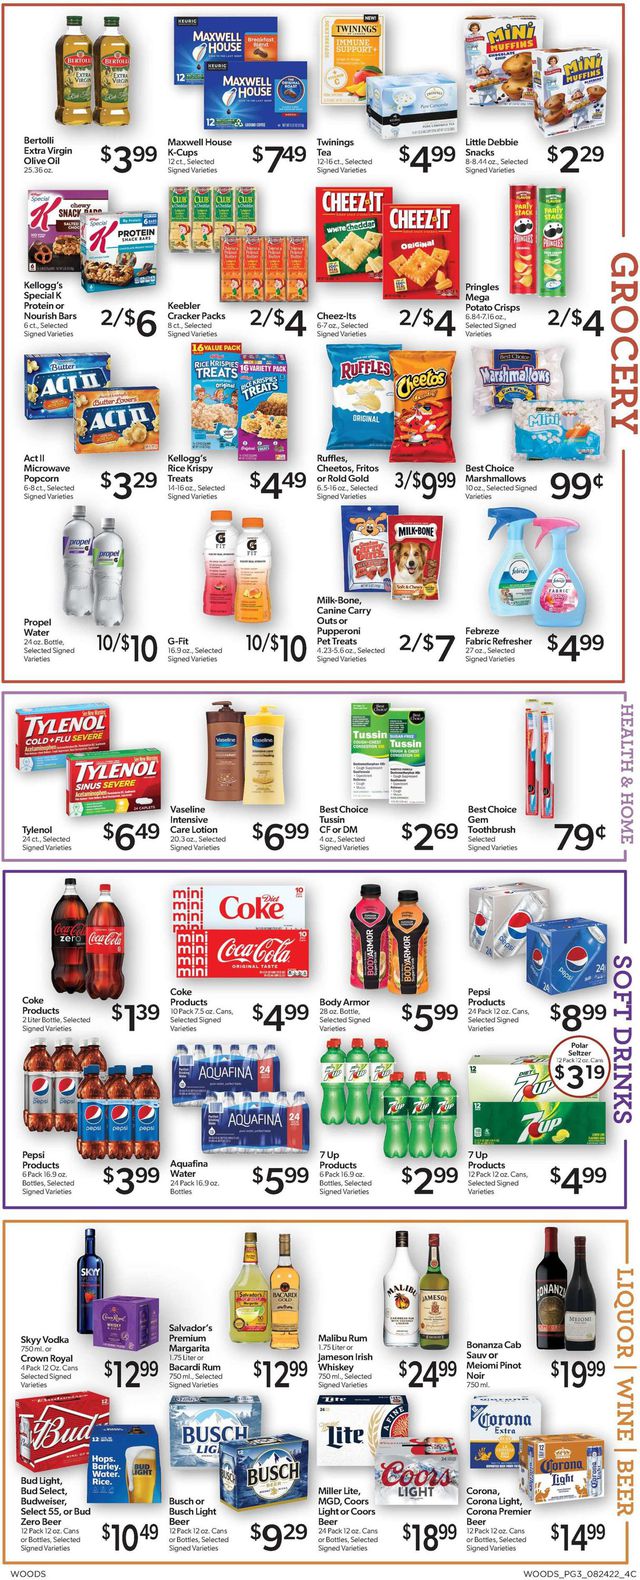 Woods Supermarket Ad from 08/24/2022